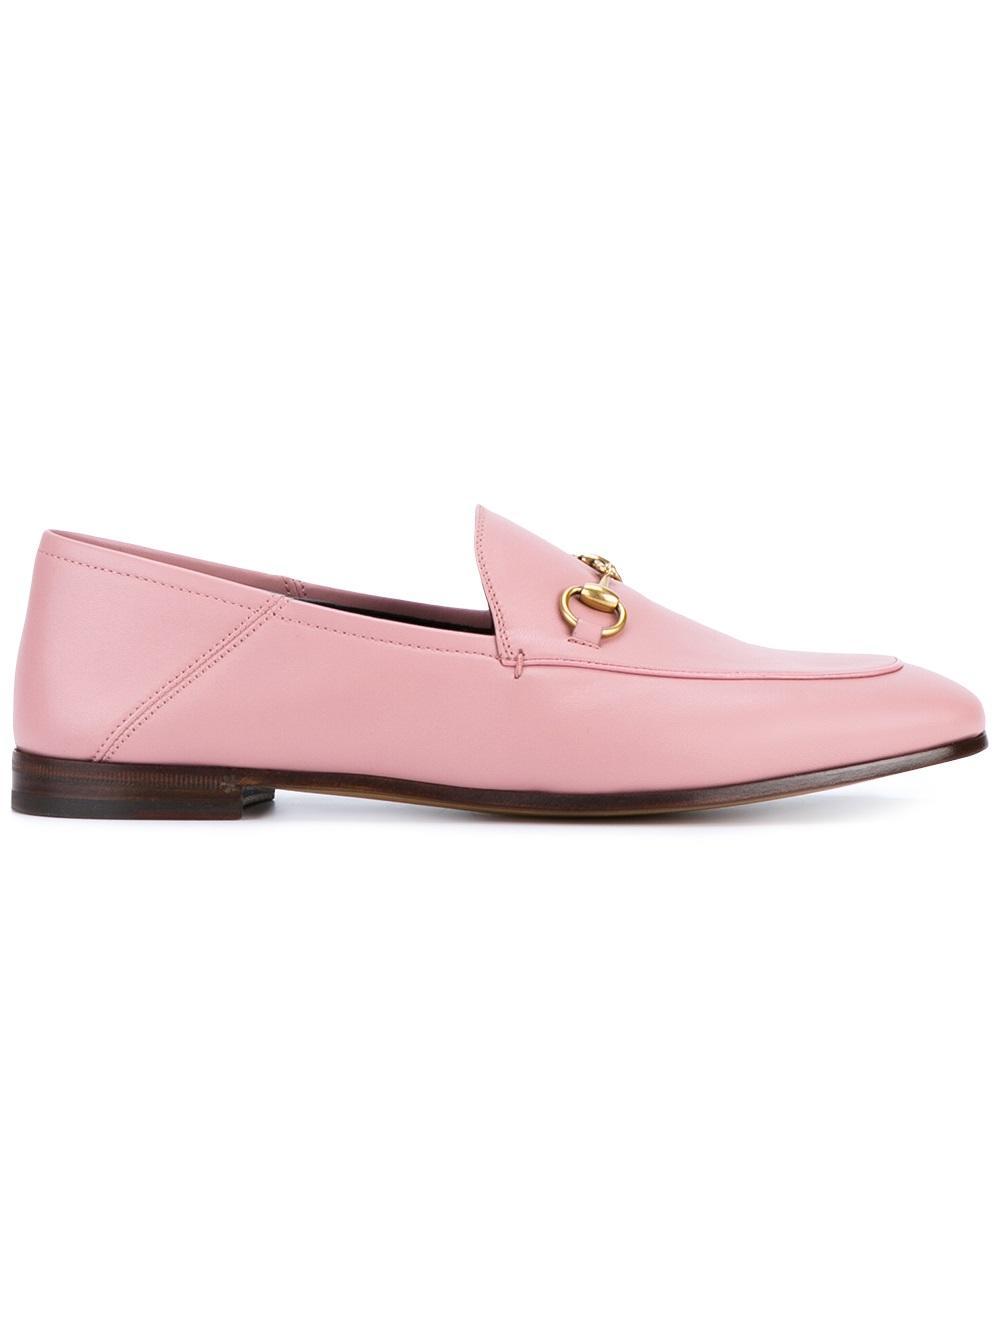 Gucci Jordaan Leather Loafers in Pink | Lyst